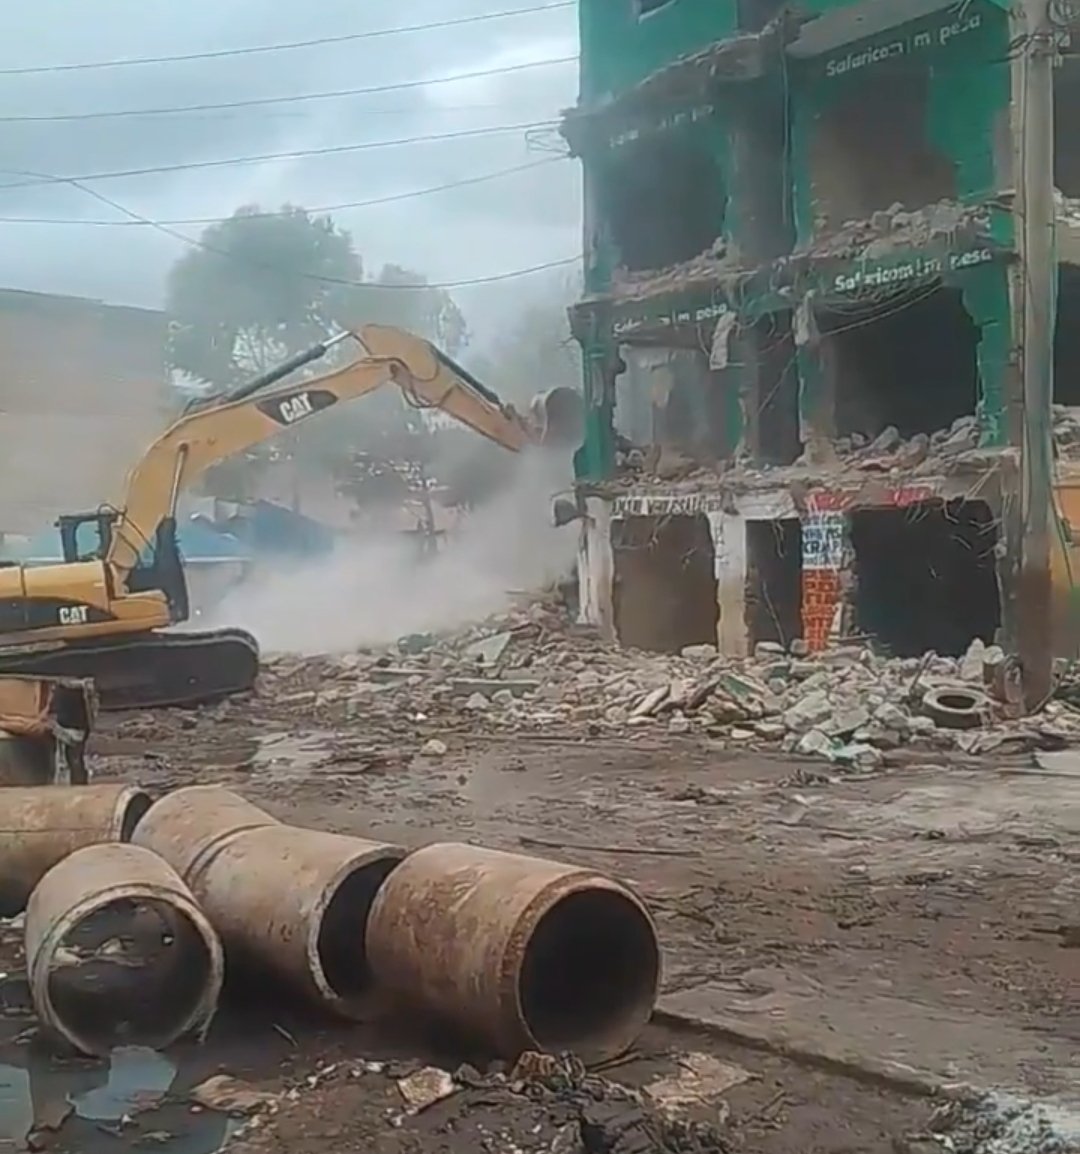 Ongoing Demolitions in Mathare North leaves multiple residents stranded. Watch👇